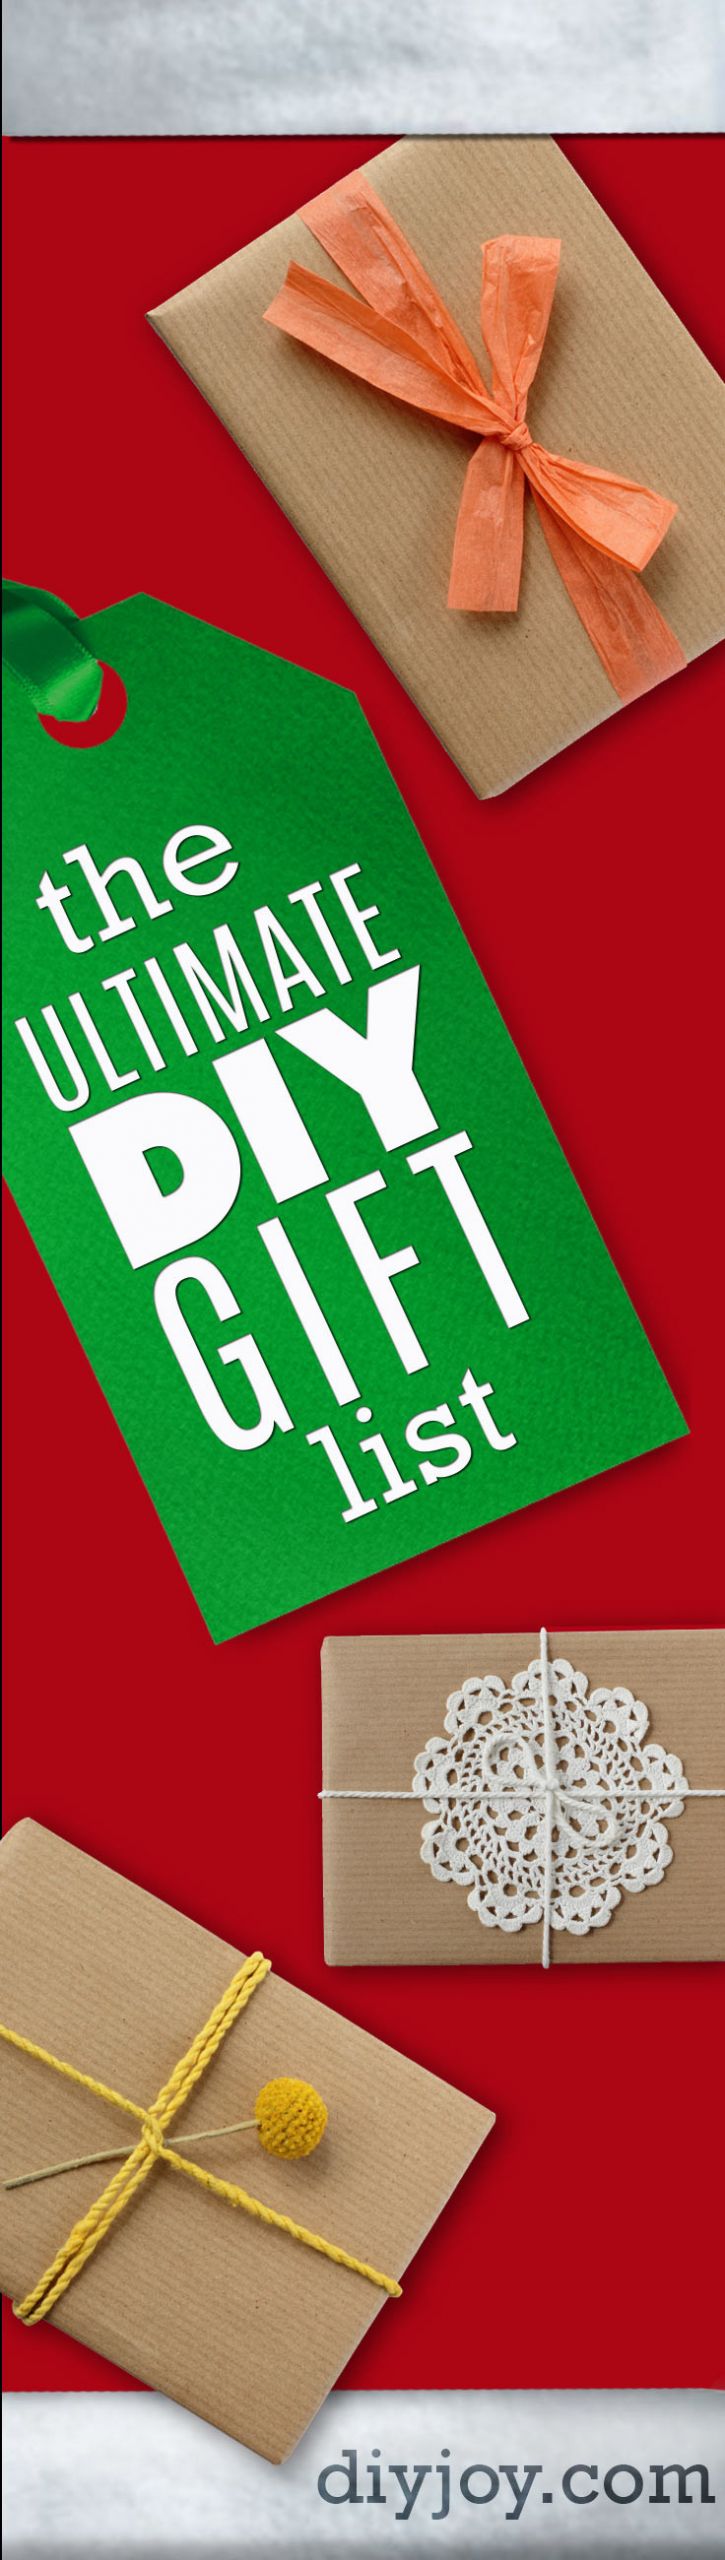 Best DIY Christmas Gifts
 The Ultimate DIY Christmas Gifts list